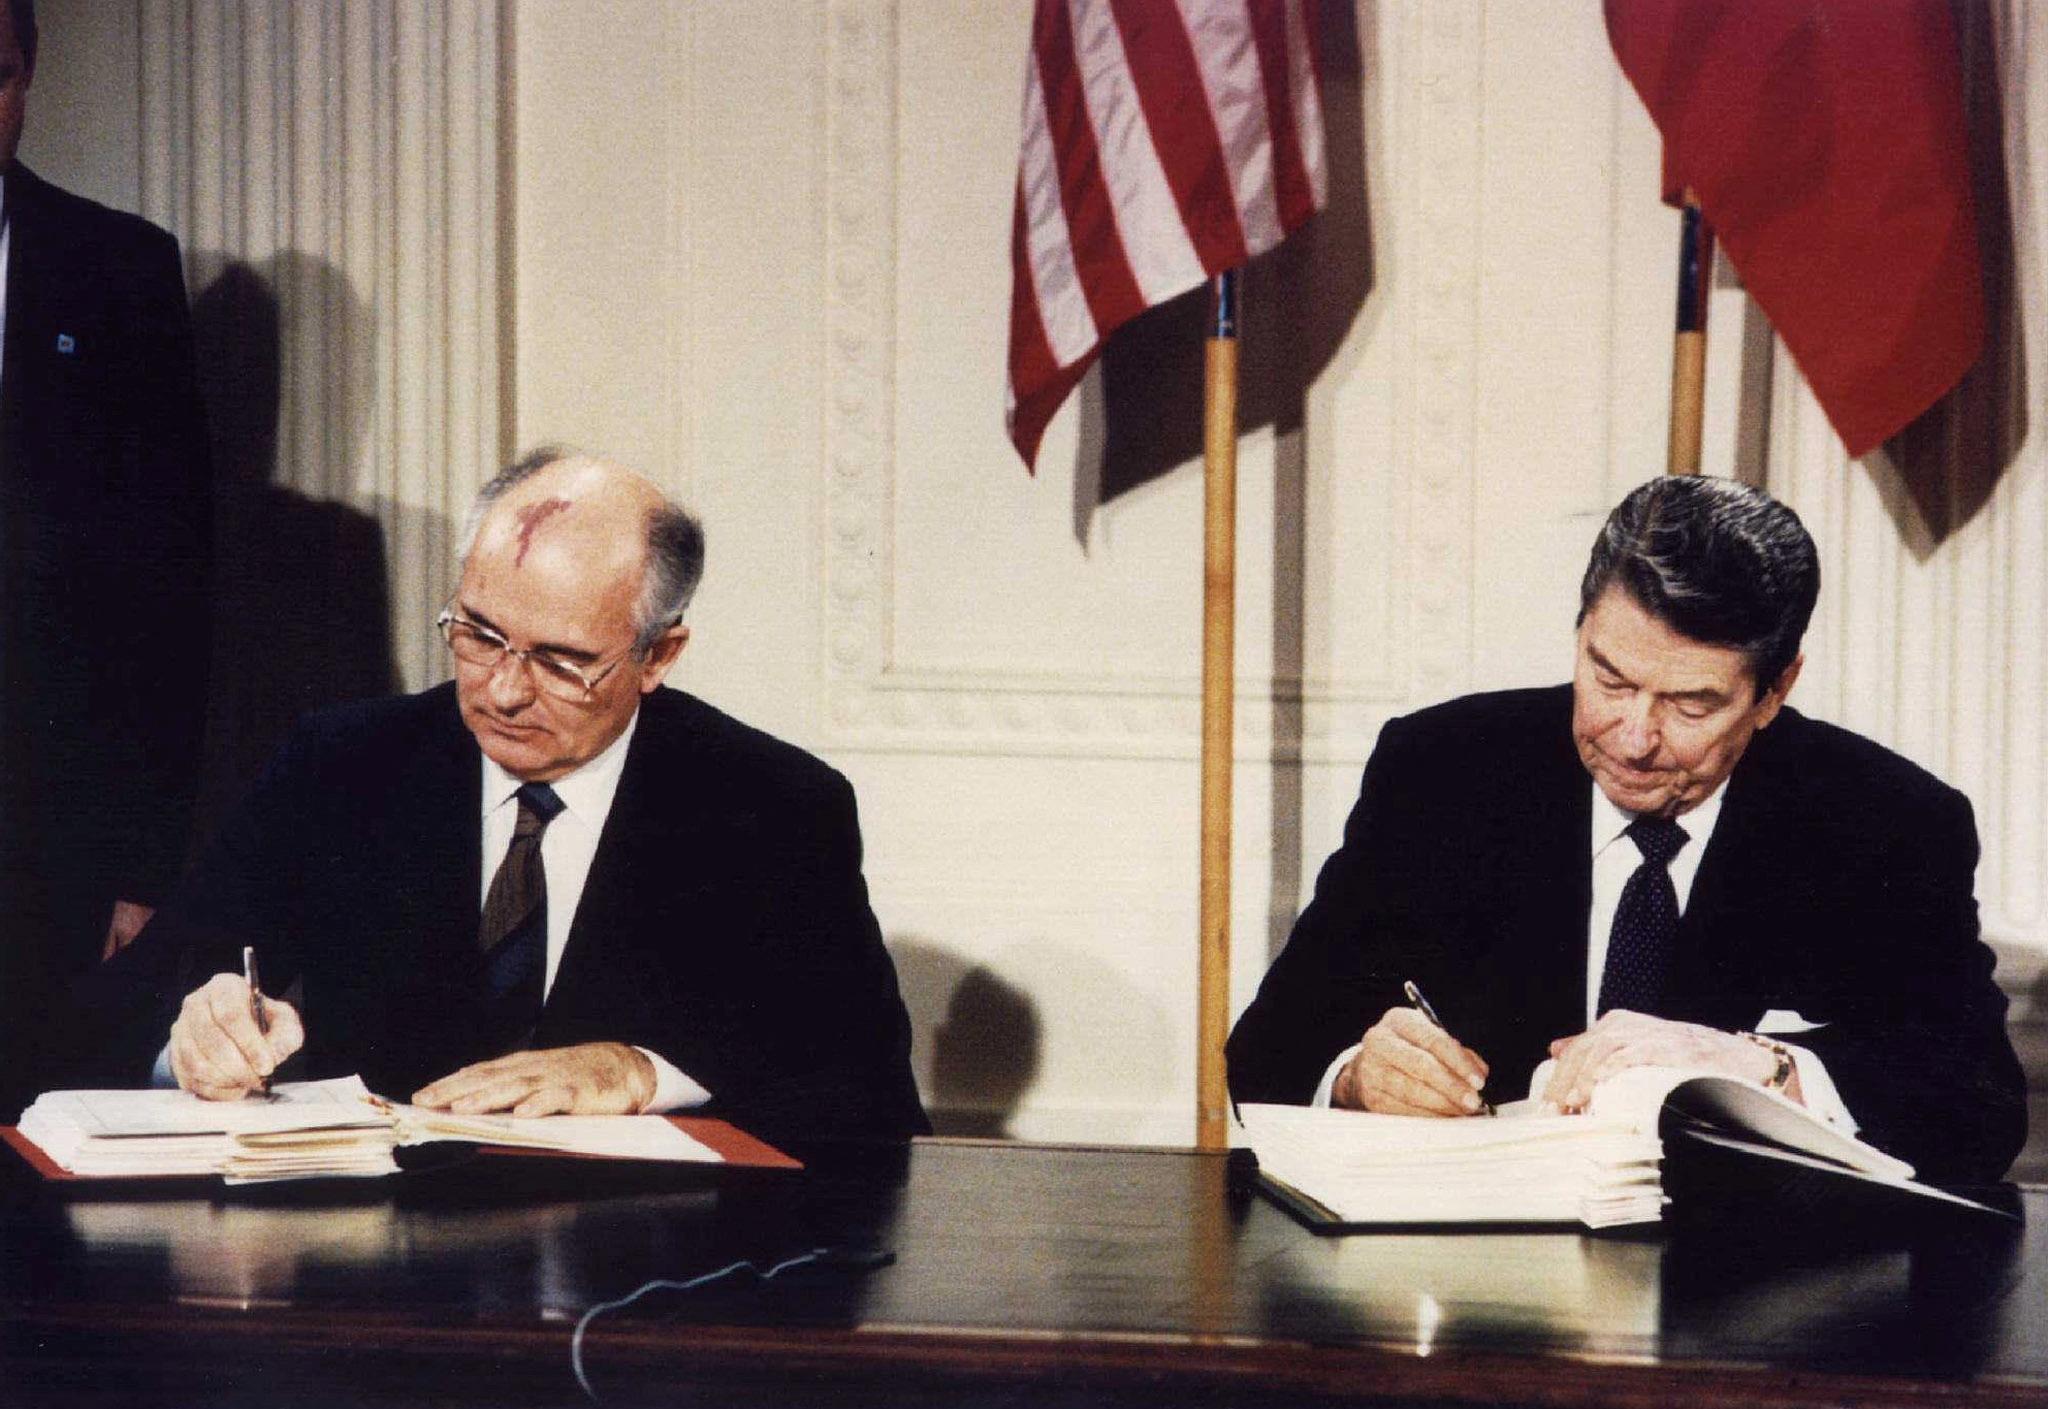 FORMER US PRESIDENT REAGAN WITH FORMER SOVIET LEADER GORBACHEV AT THE WHITE HOUSE.